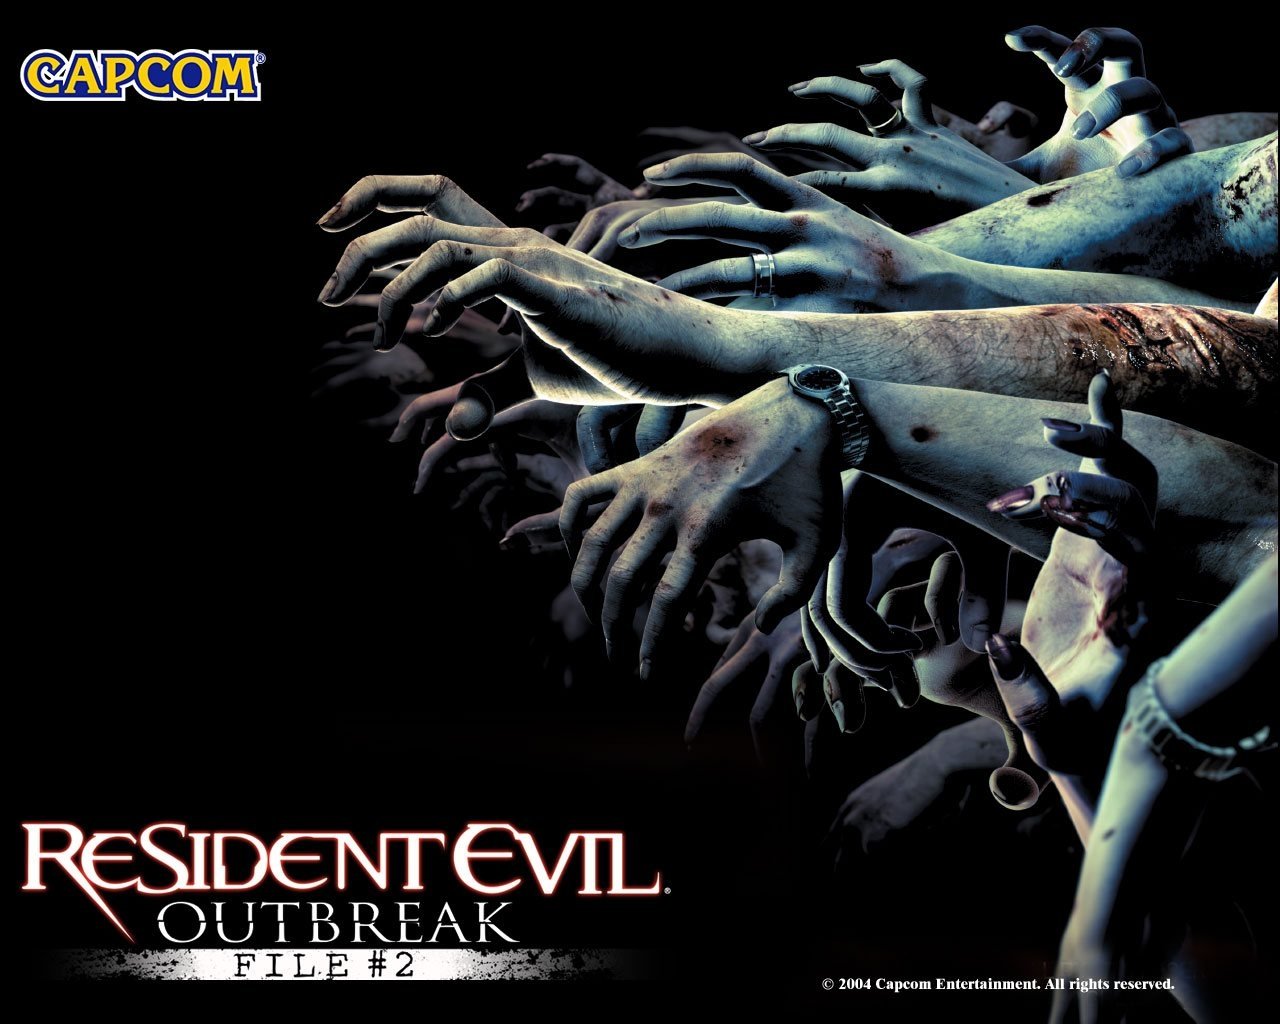 Resident Evil Outbreak File 2 Image   ID 473207   Image Abyss 1280x1024